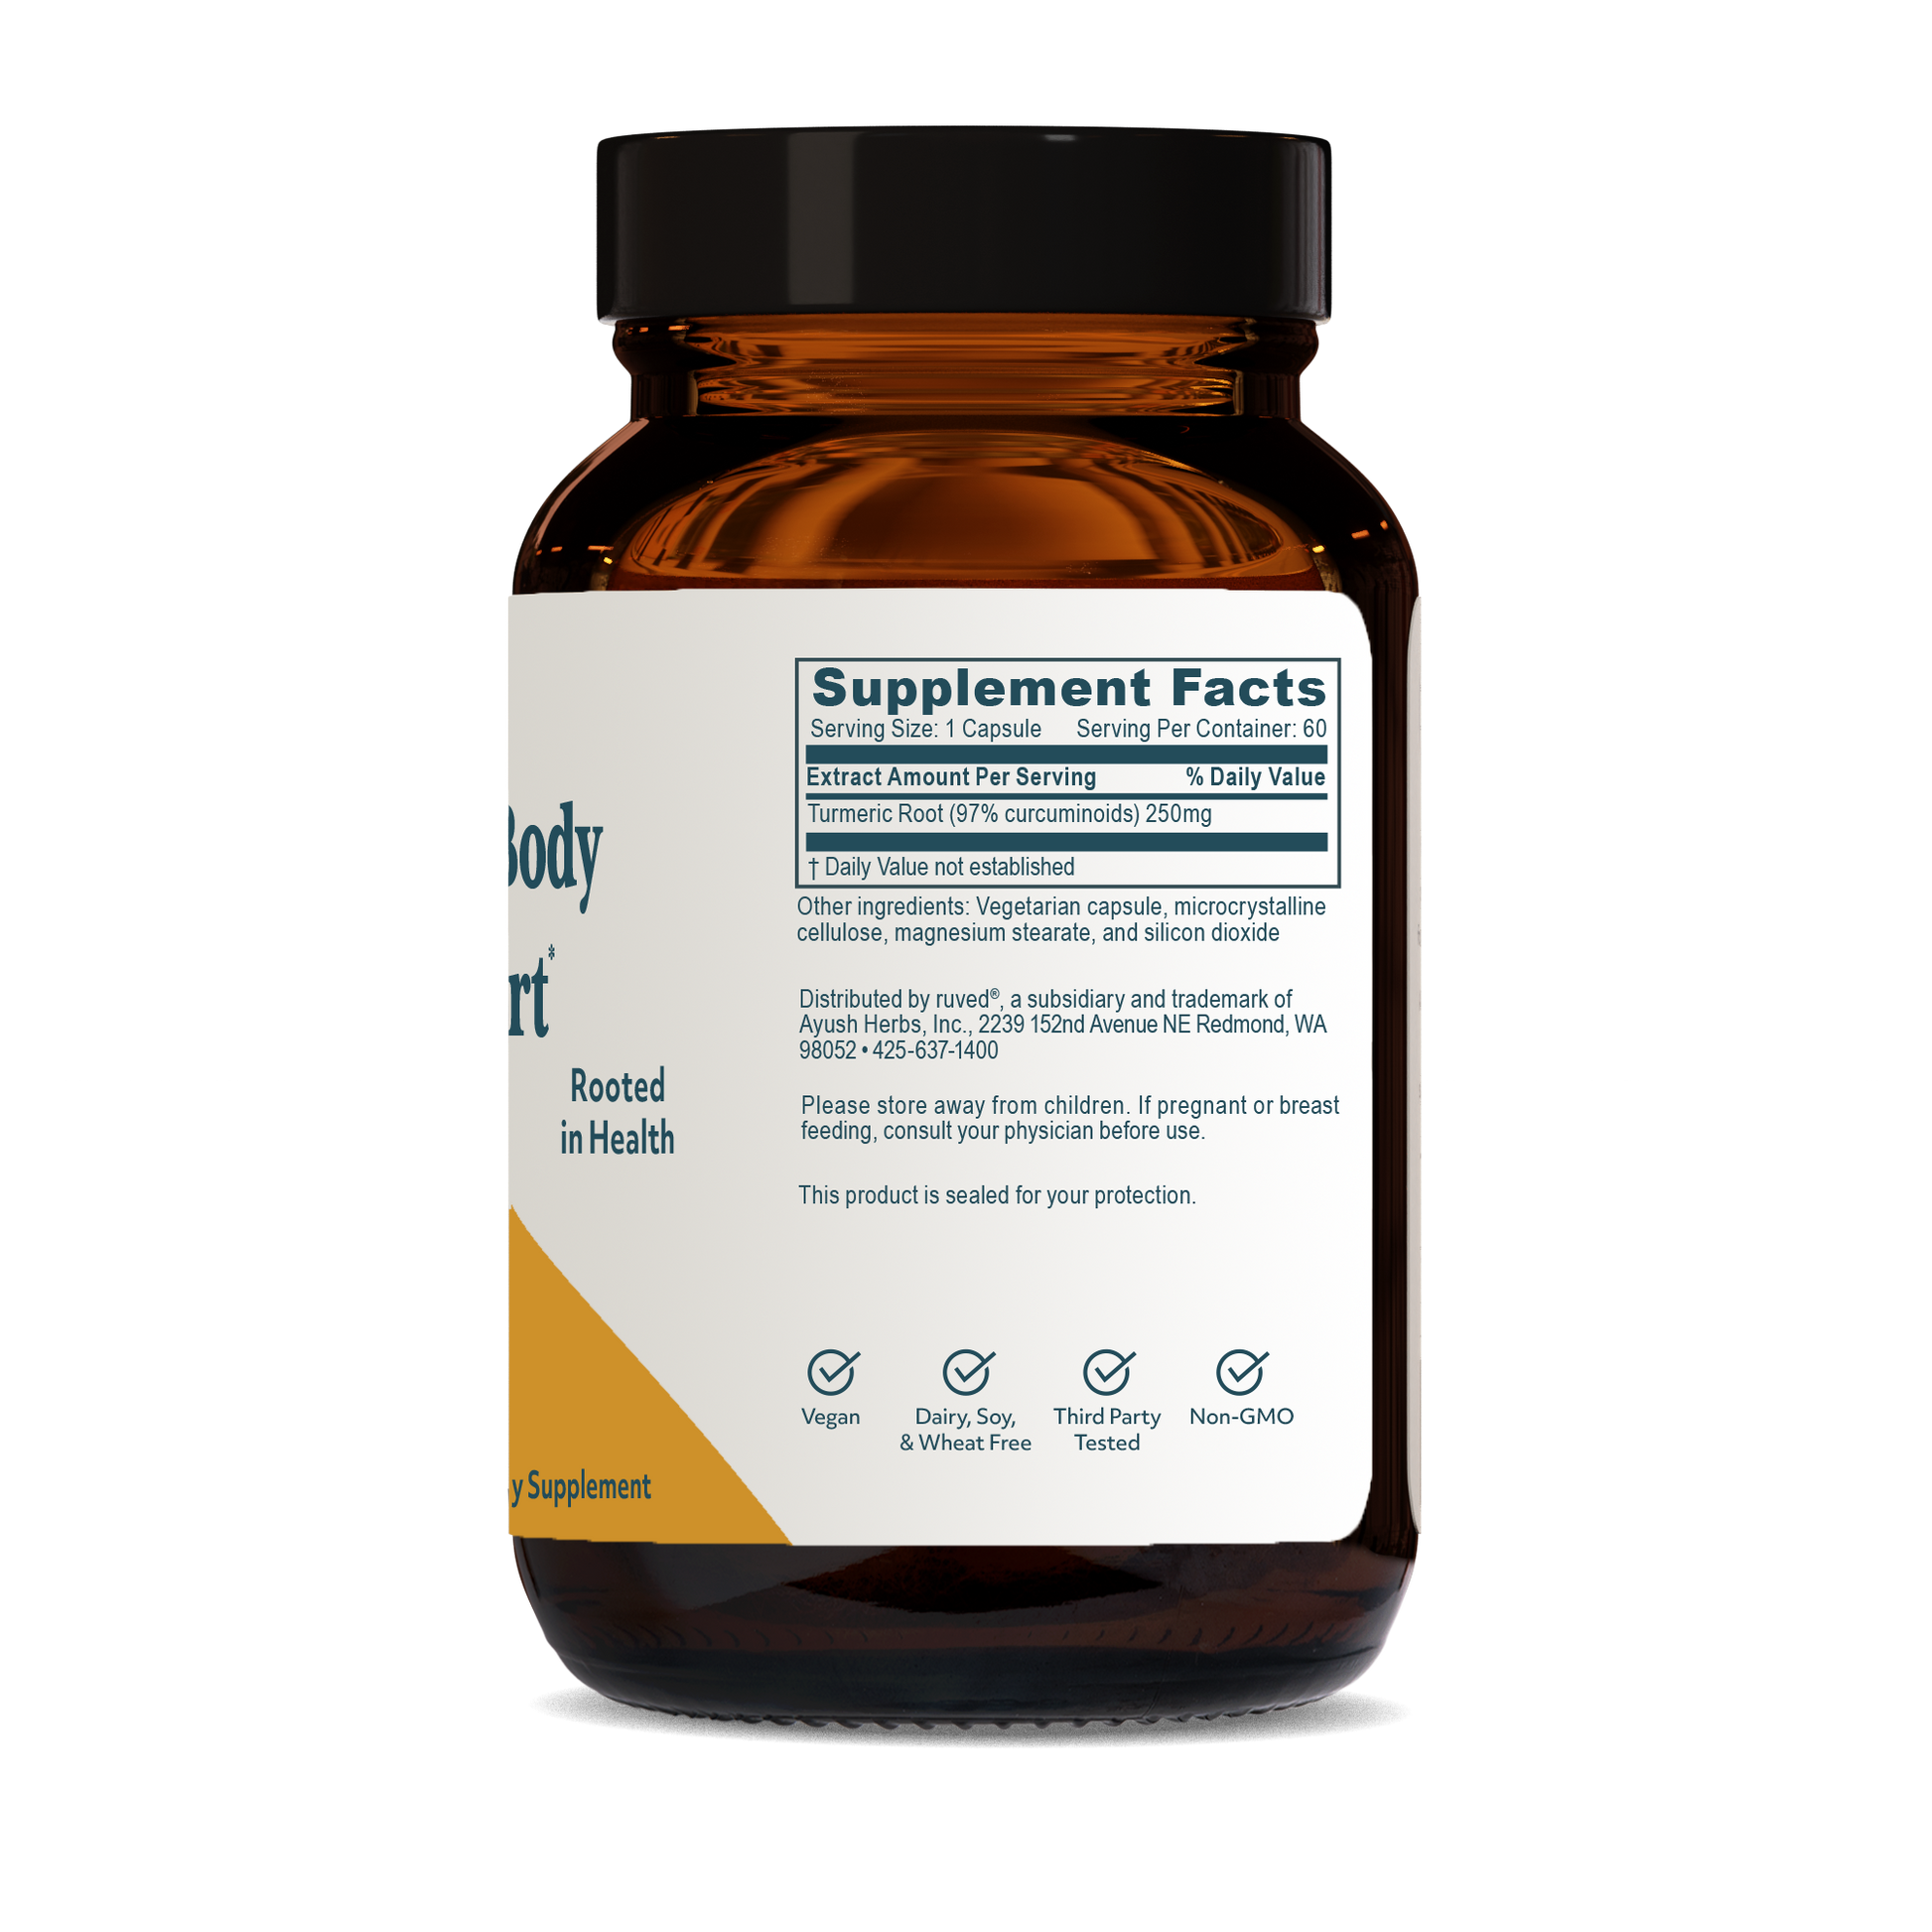 Curcumin Capsules Supplement Facts Side - Organic Turmeric Extract, 60 Vegetarian Capsules, Natural Anti-Inflammatory and Antioxidant Support.